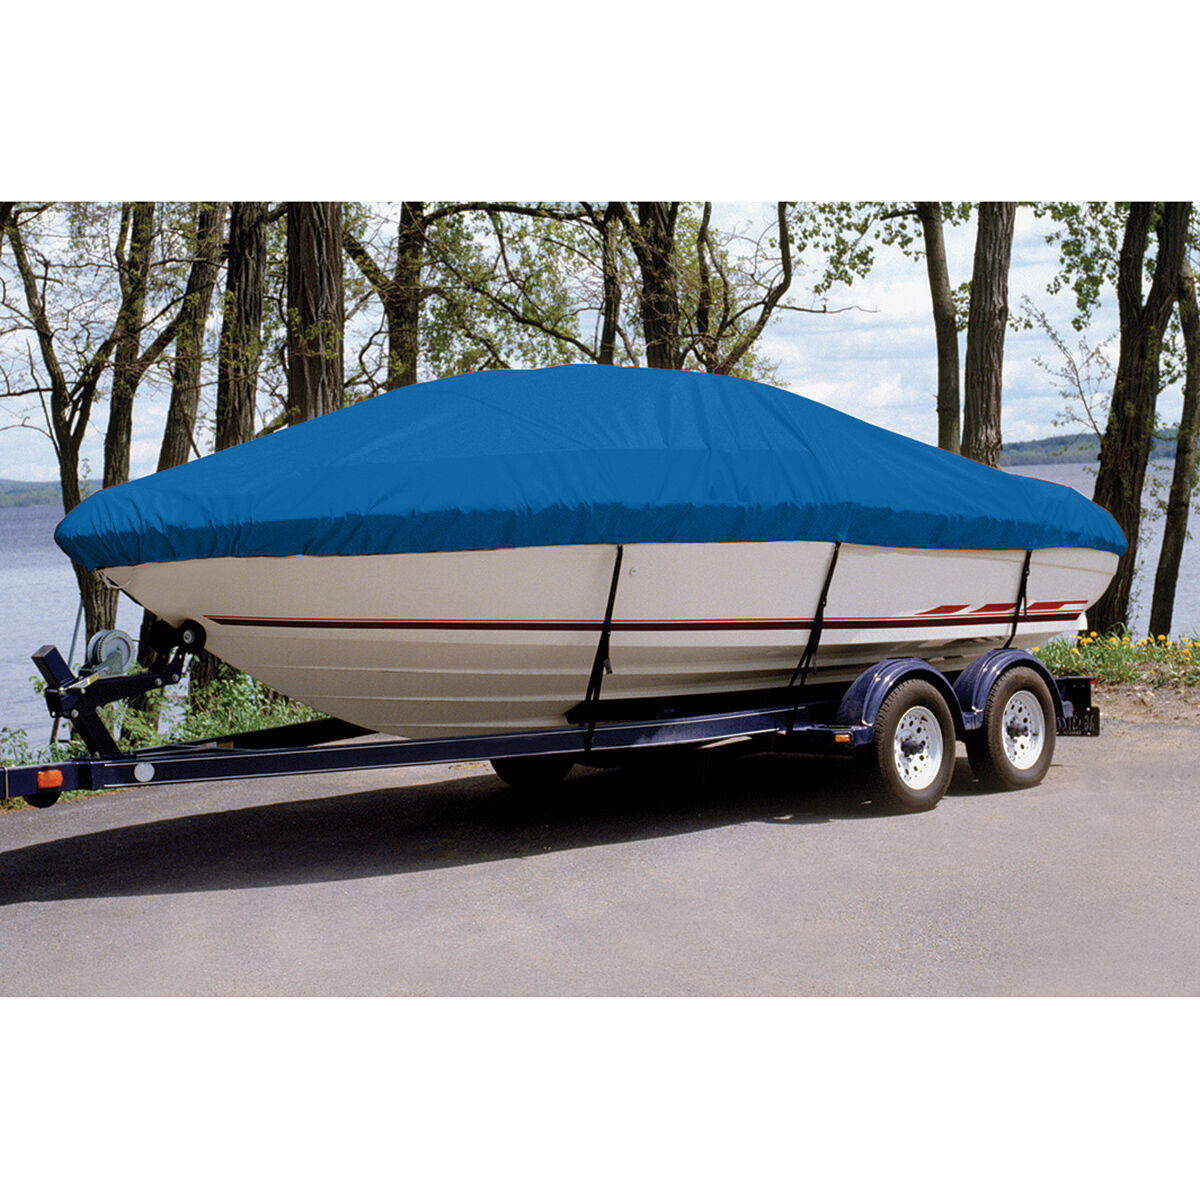 Taylor Made Trailerite Ultima Cover for 98-01 Klamath 15 Stinger/ADV/SS/R/Hood Boat Cover in Blue Polyester